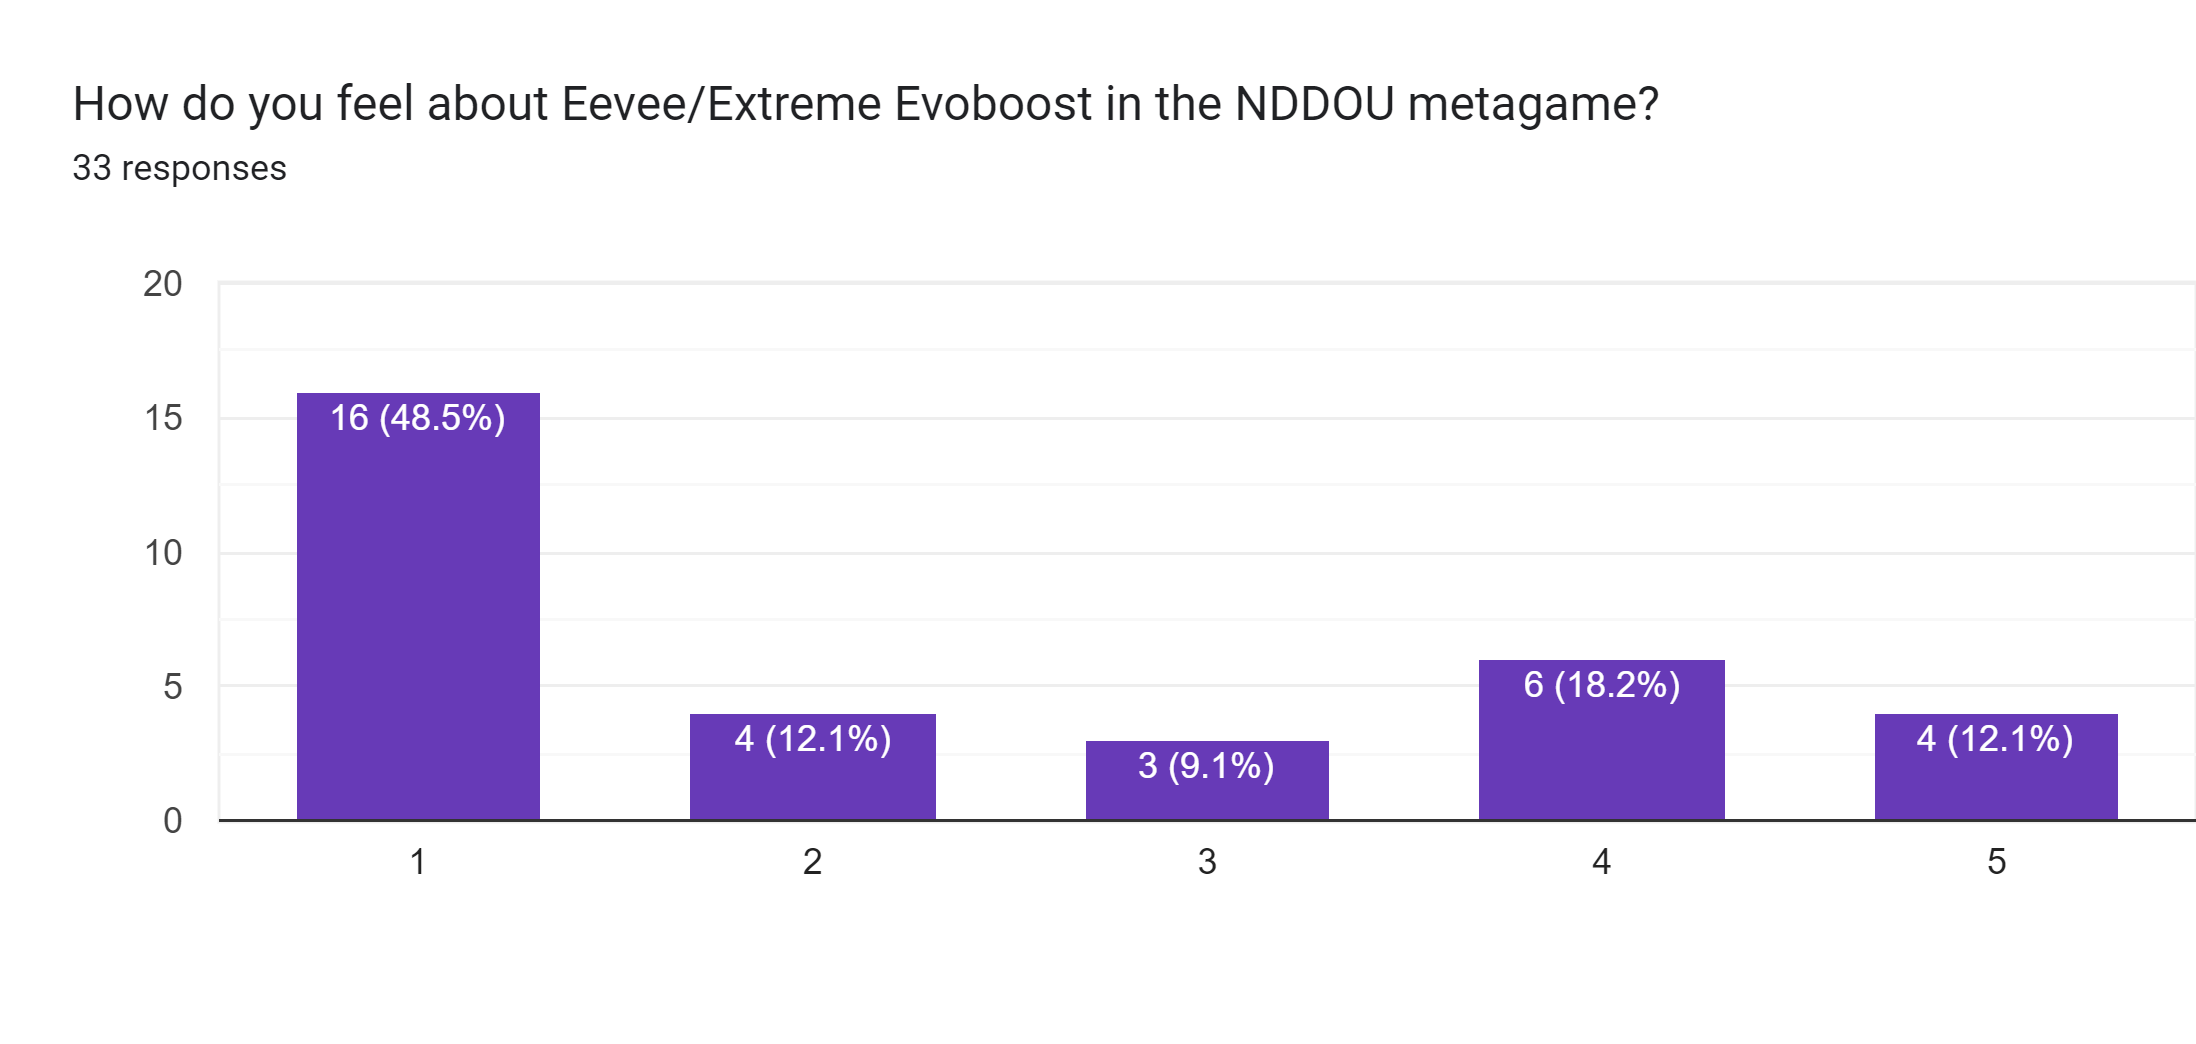 Forms response chart. Question title: How do you feel about Eevee/Extreme Evoboost in the NDDOU metagame?. Number of responses: 33 responses.